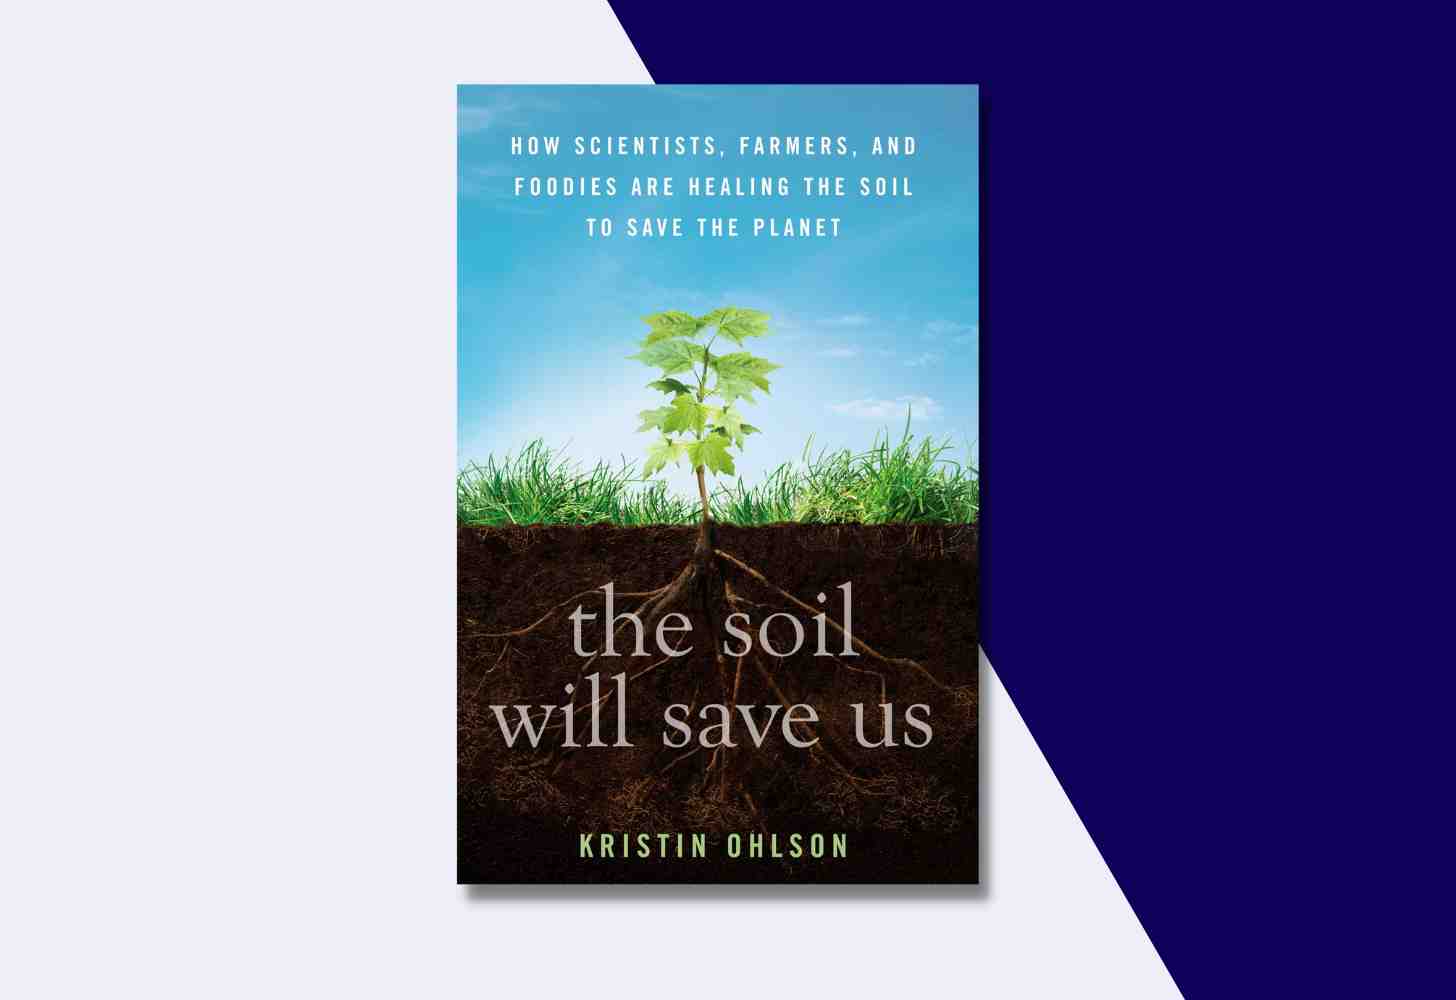 The Cover Of: “The Soil Will Save Us: How Scientists, Farmers, and Foodies Are Healing the Soil to Save the Planet” by Kristin Ohlson